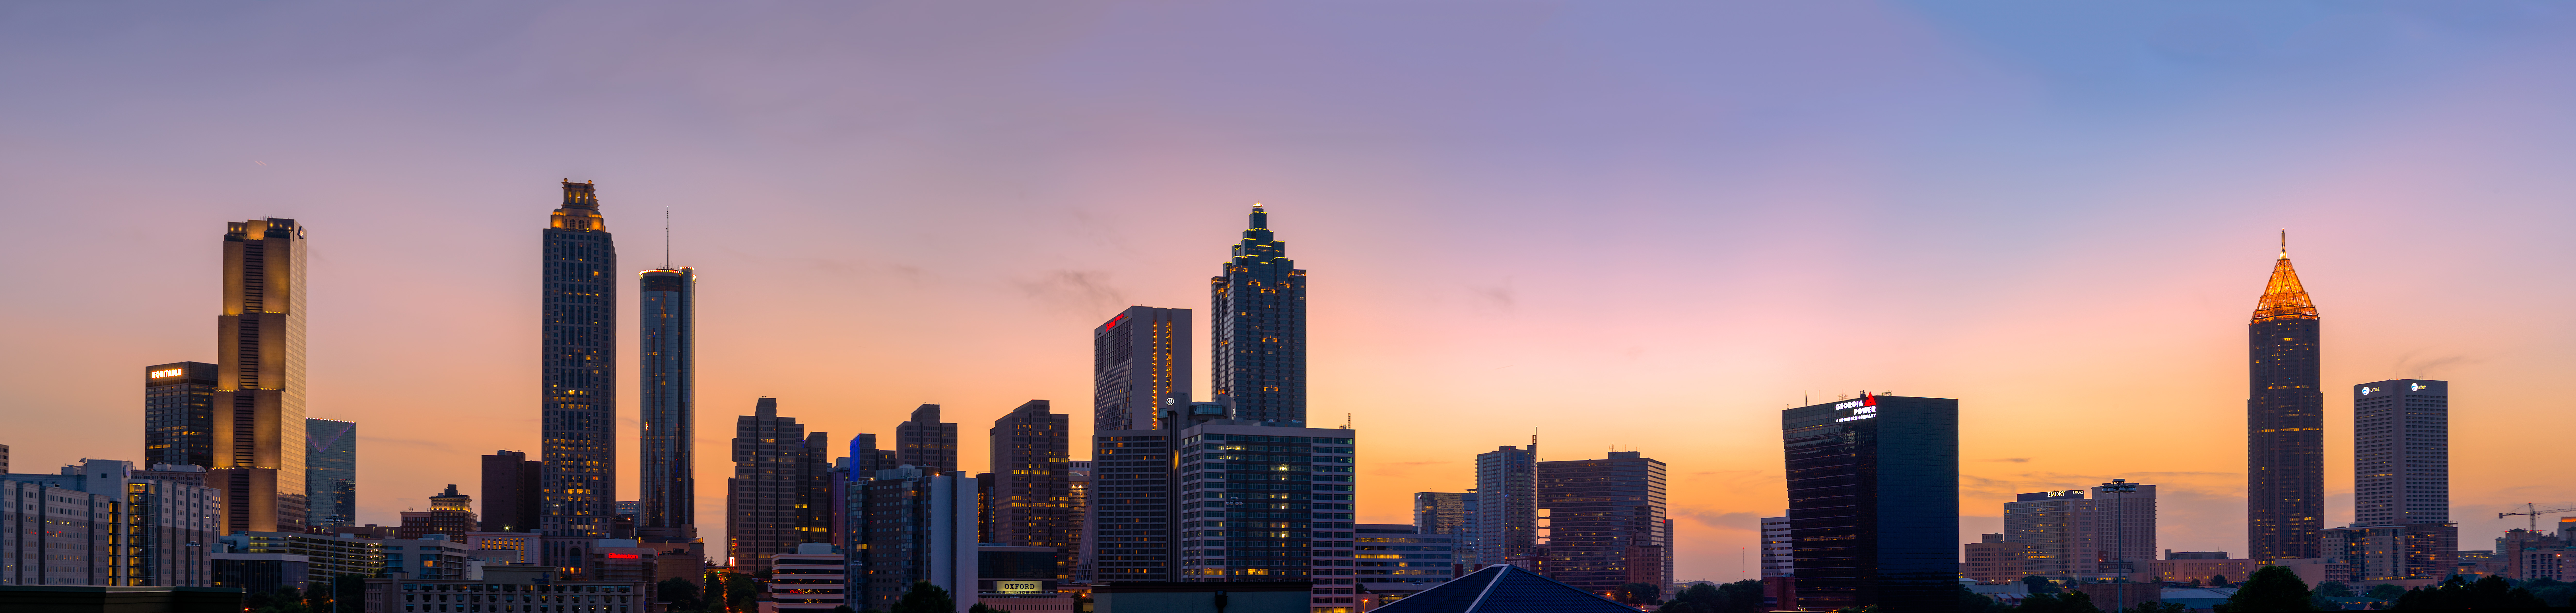 A picture of the Atlanta skyline at sunset.